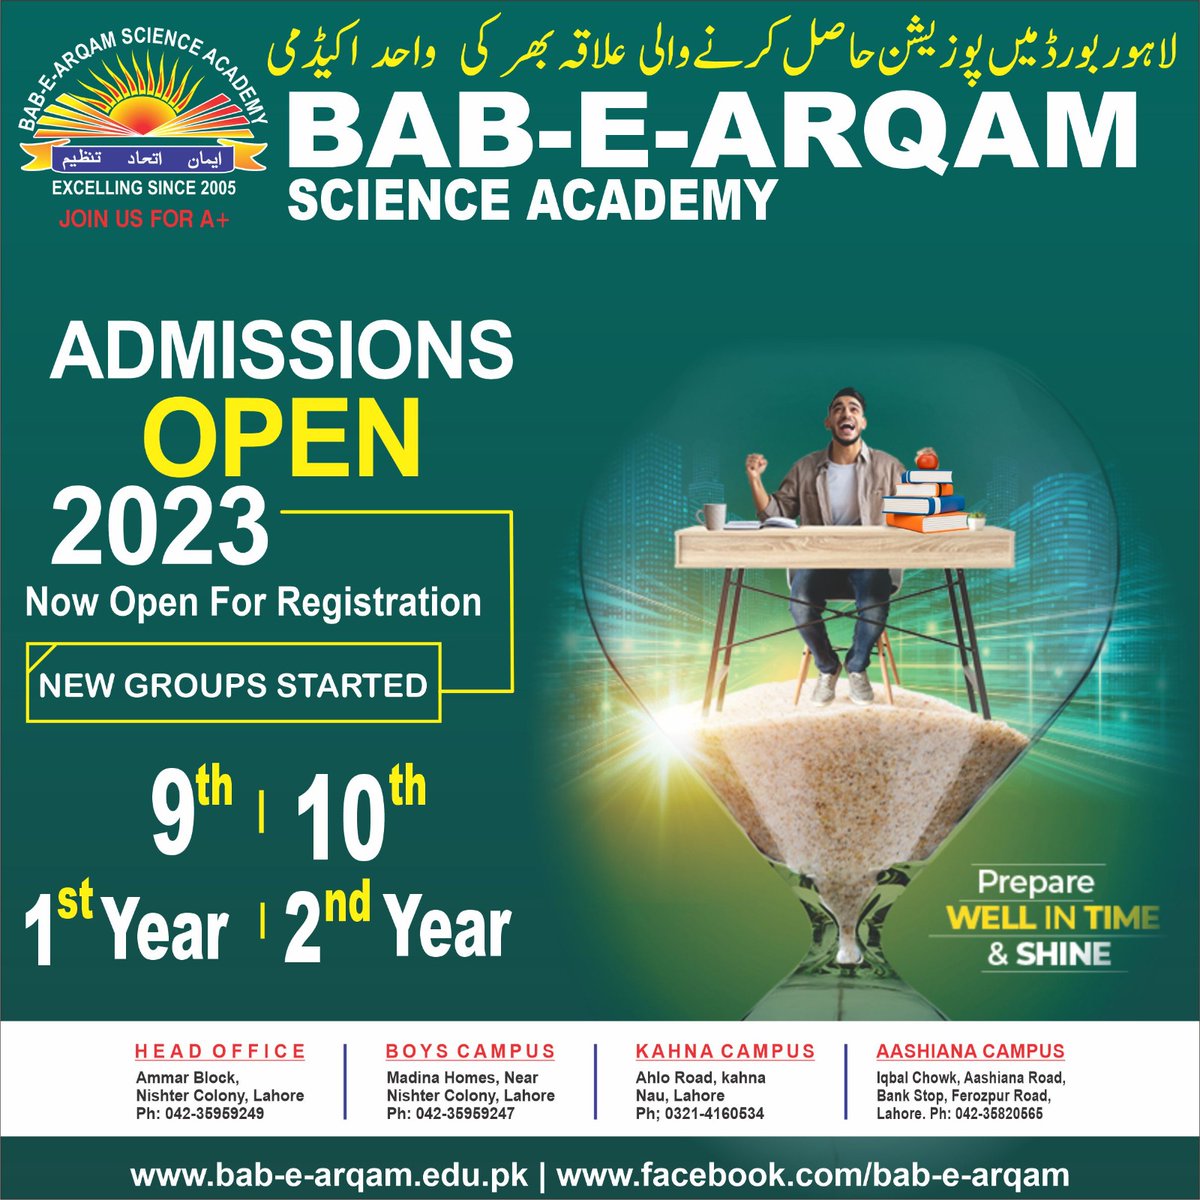 #AdmissionOpen #EnrollmentOpen #EducationOpportunities #JoinOurAcademy #ApplyNow #EnrollToday #LearningOpportunities #ExceptionalEducation 
#BAB_E_ARQAM #babearqam
#bab_e_arqam_science_academy
#babearqamscienceacademy
#bab_e_arqam_group_of_institutions